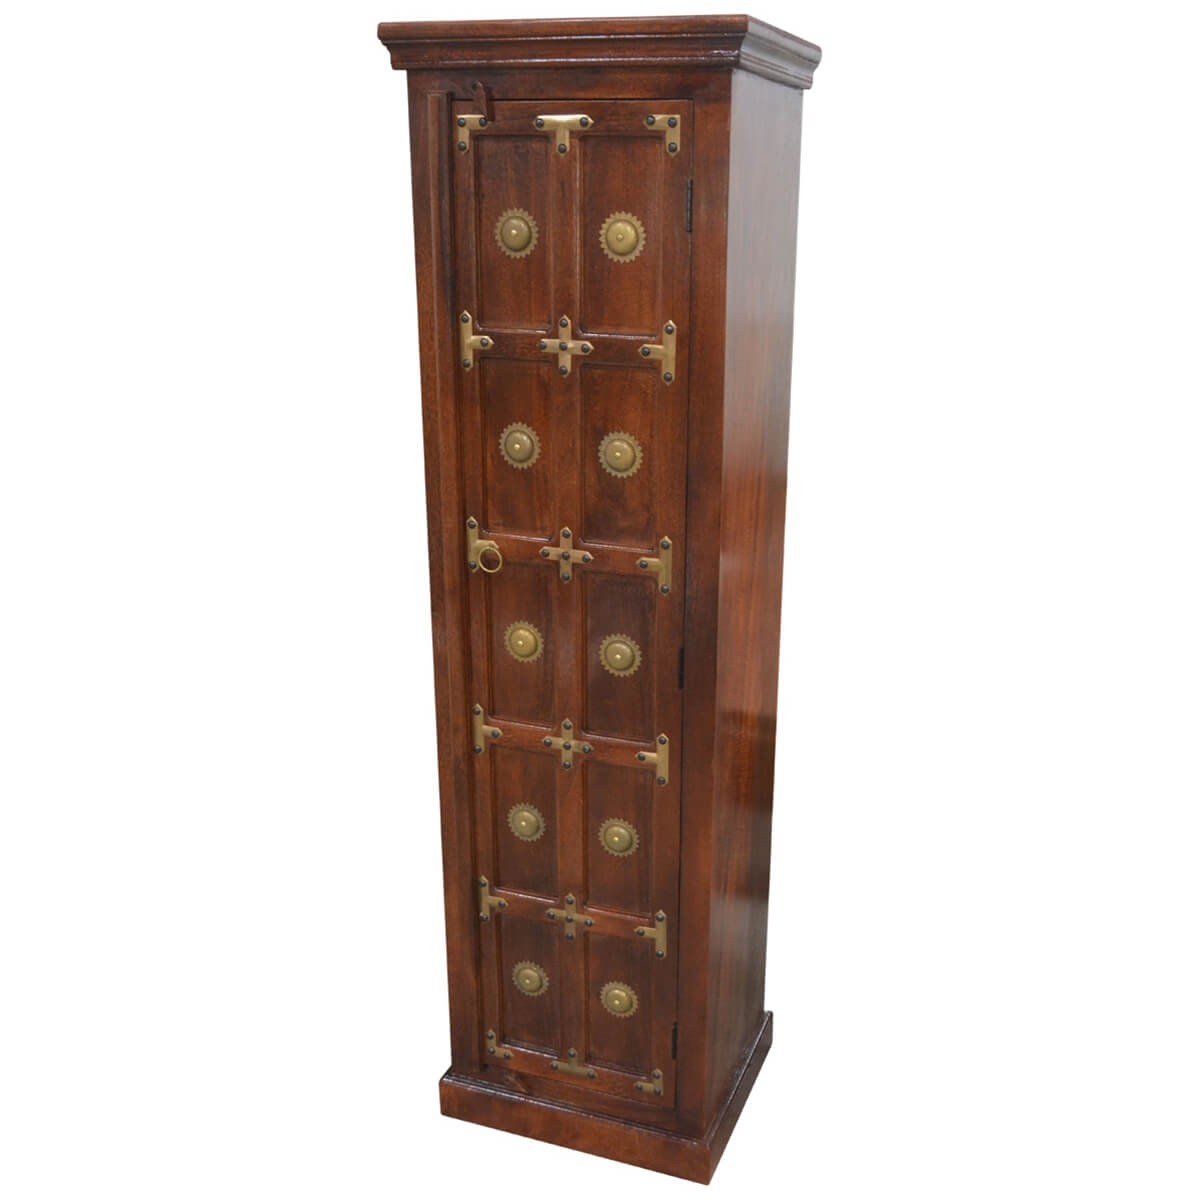 Barstow antique heritage brass accents wood tall linen cabinet